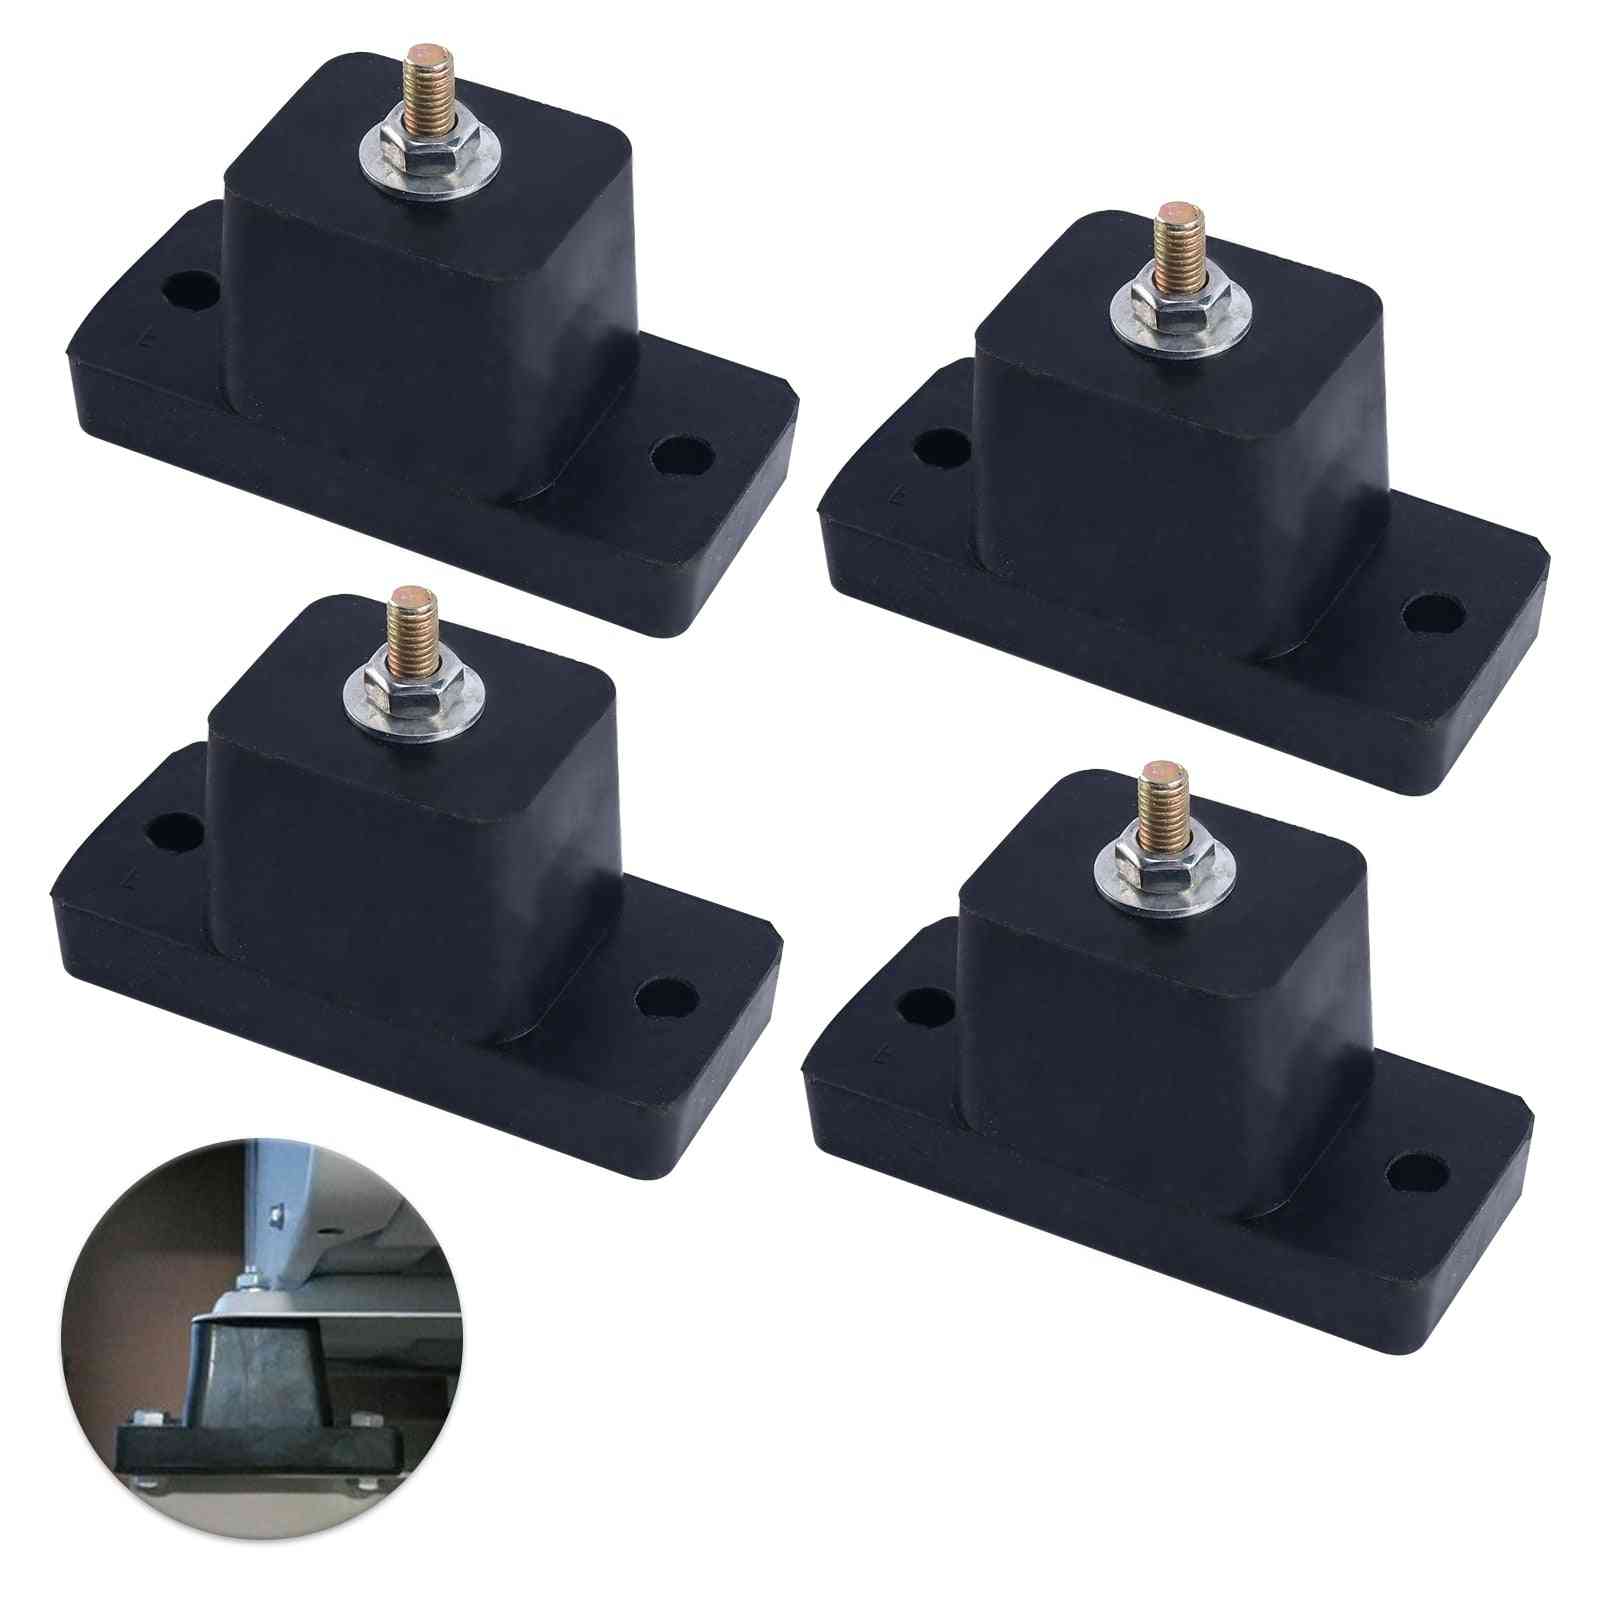 Cushion Air Conditioner Rubber Vibration Mounting Bracket Shock Absorbing Anti-vibration Isolator Pads